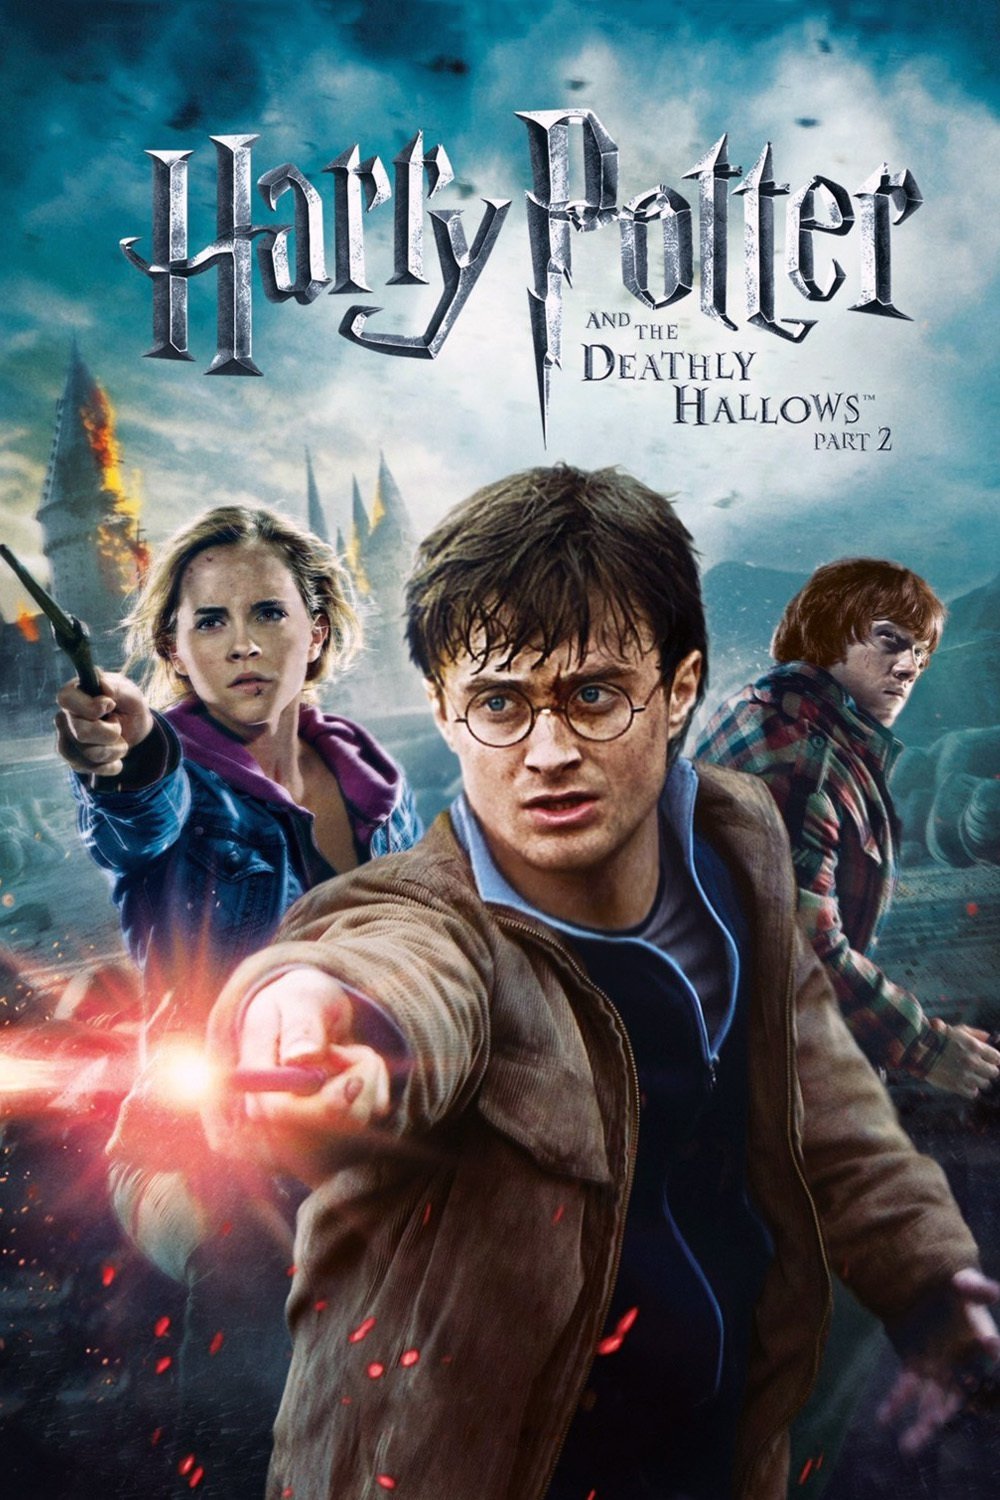 film harry potter and the deathly hallows part 2 download